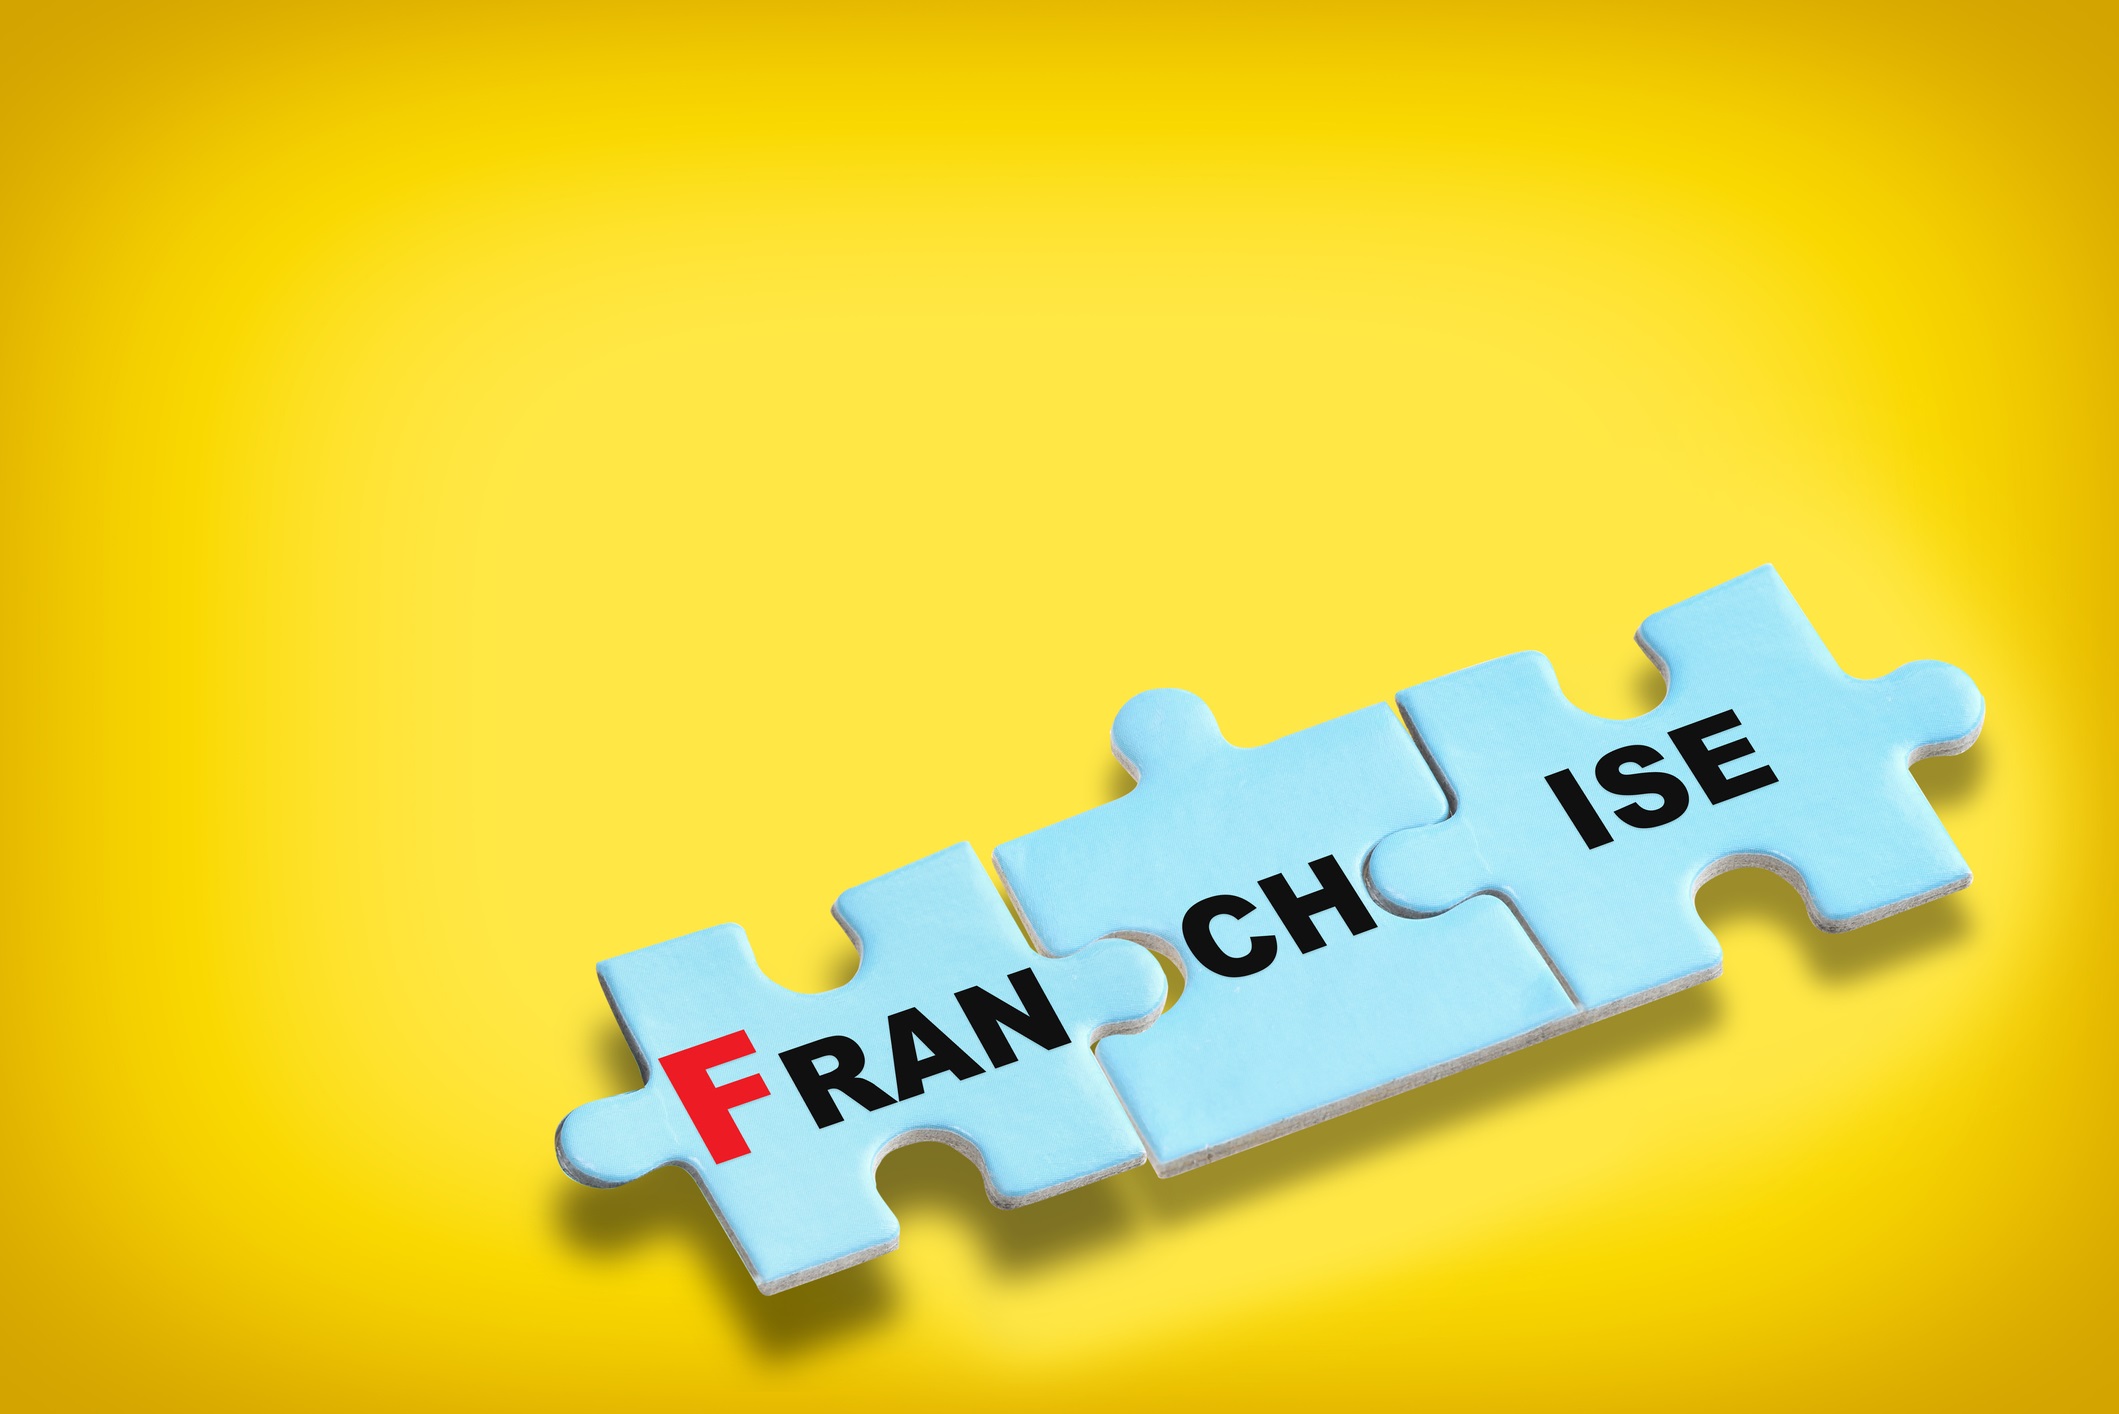 The word "franchise" is written on blue puzzle pieces set against a yellow background for fastest-growing franchises blog.